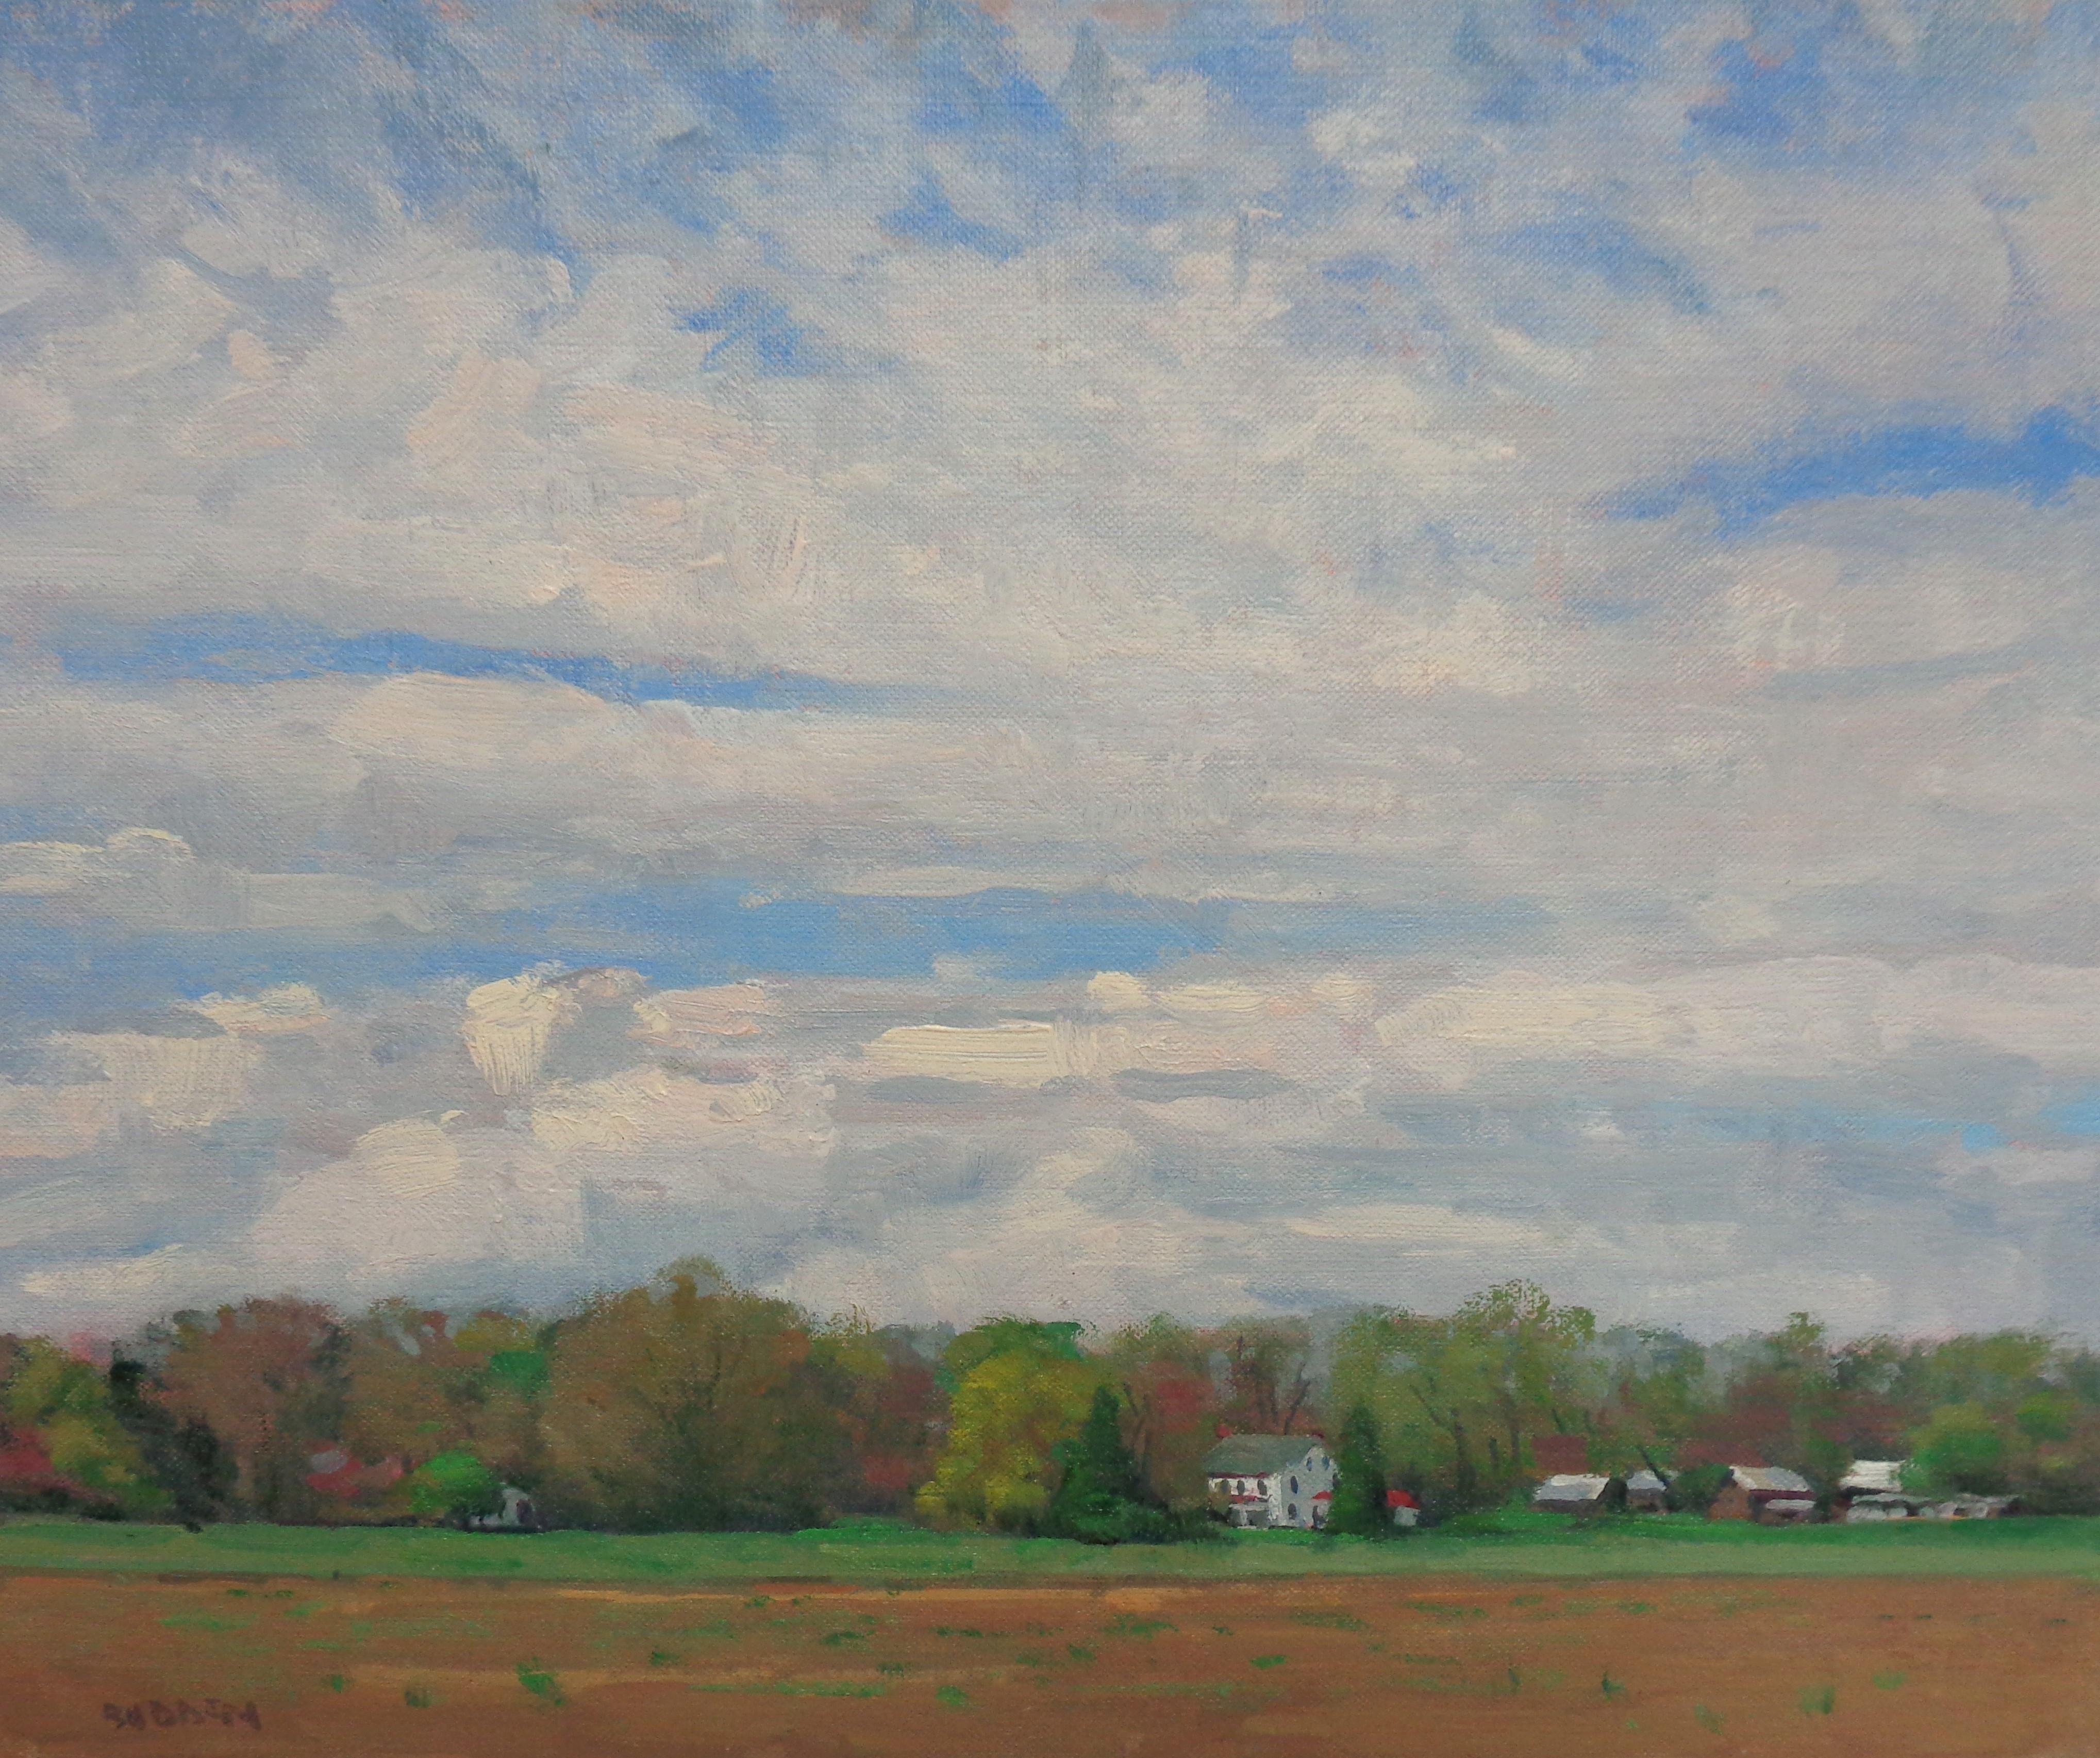 Spring Skies
oil/panel
11 x 14 unframed
Spring Skies is a beautiful impressionistic landscape oil painting that I did on location near my studio in 2020. The painting is on a canvas panel and exudes the rich qualities of oil paint with bright strong